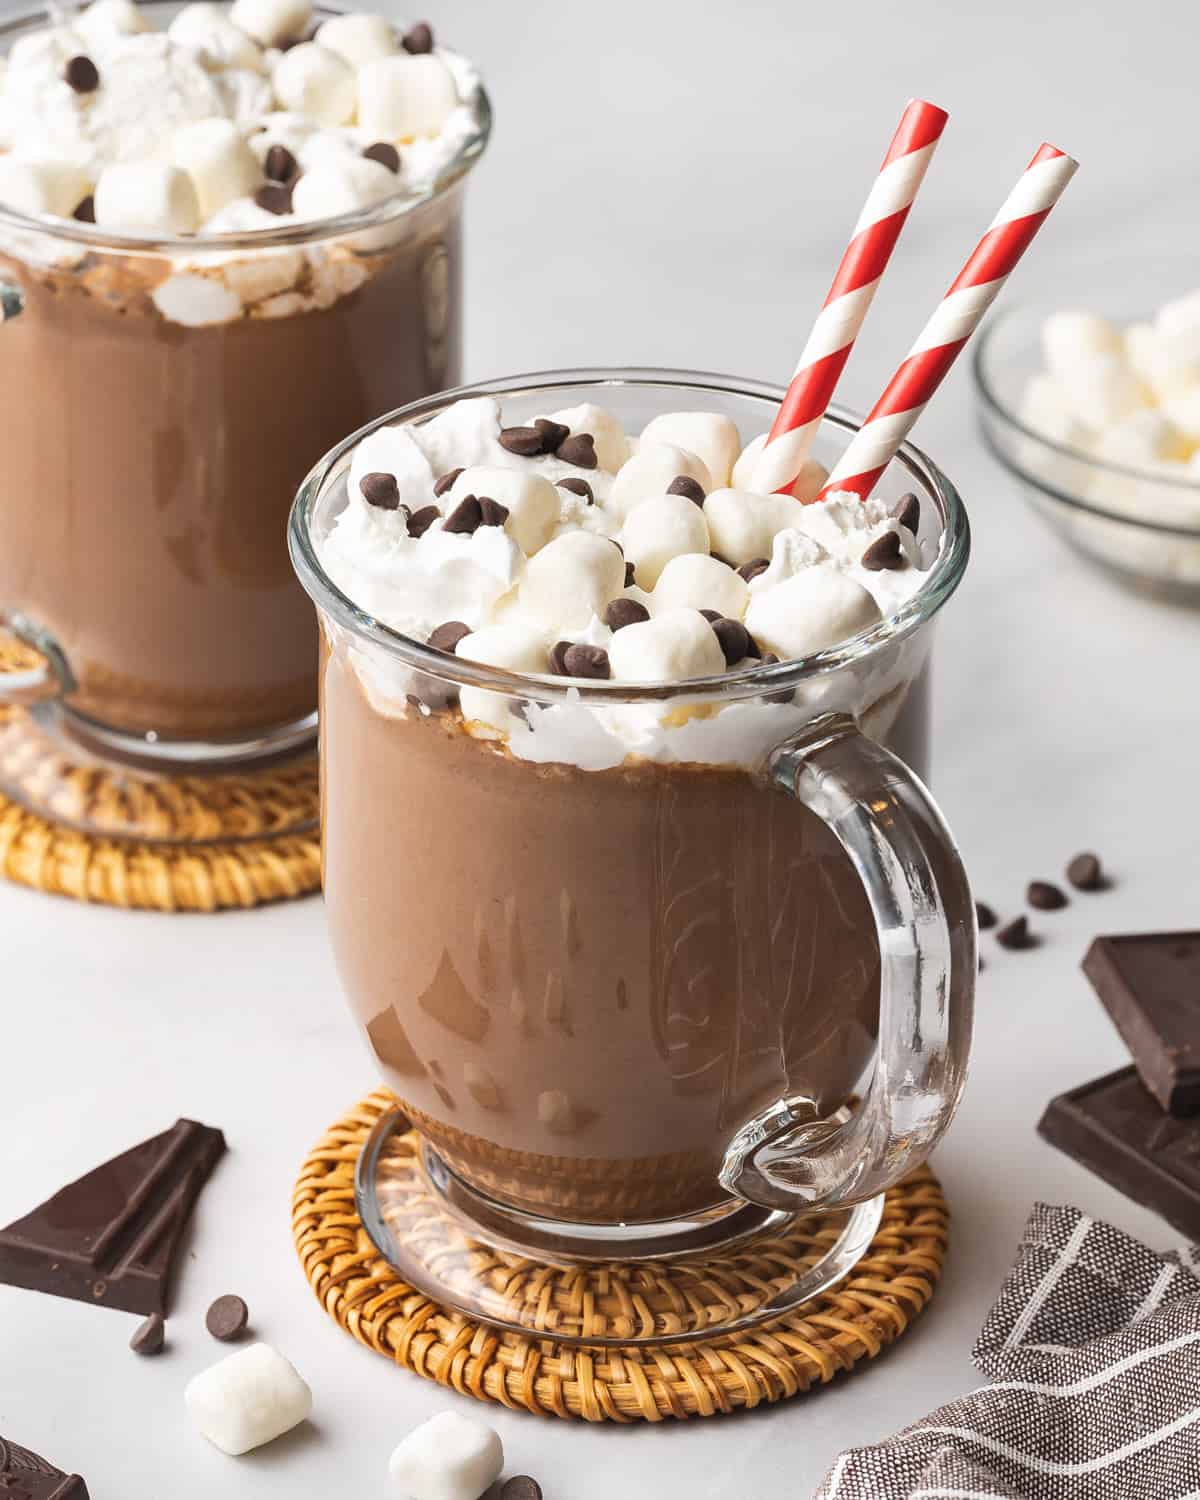 A glass mug of crockpot hot chocolate with whipped cream, mini marshmallows, mini chocolate chips and two straws.